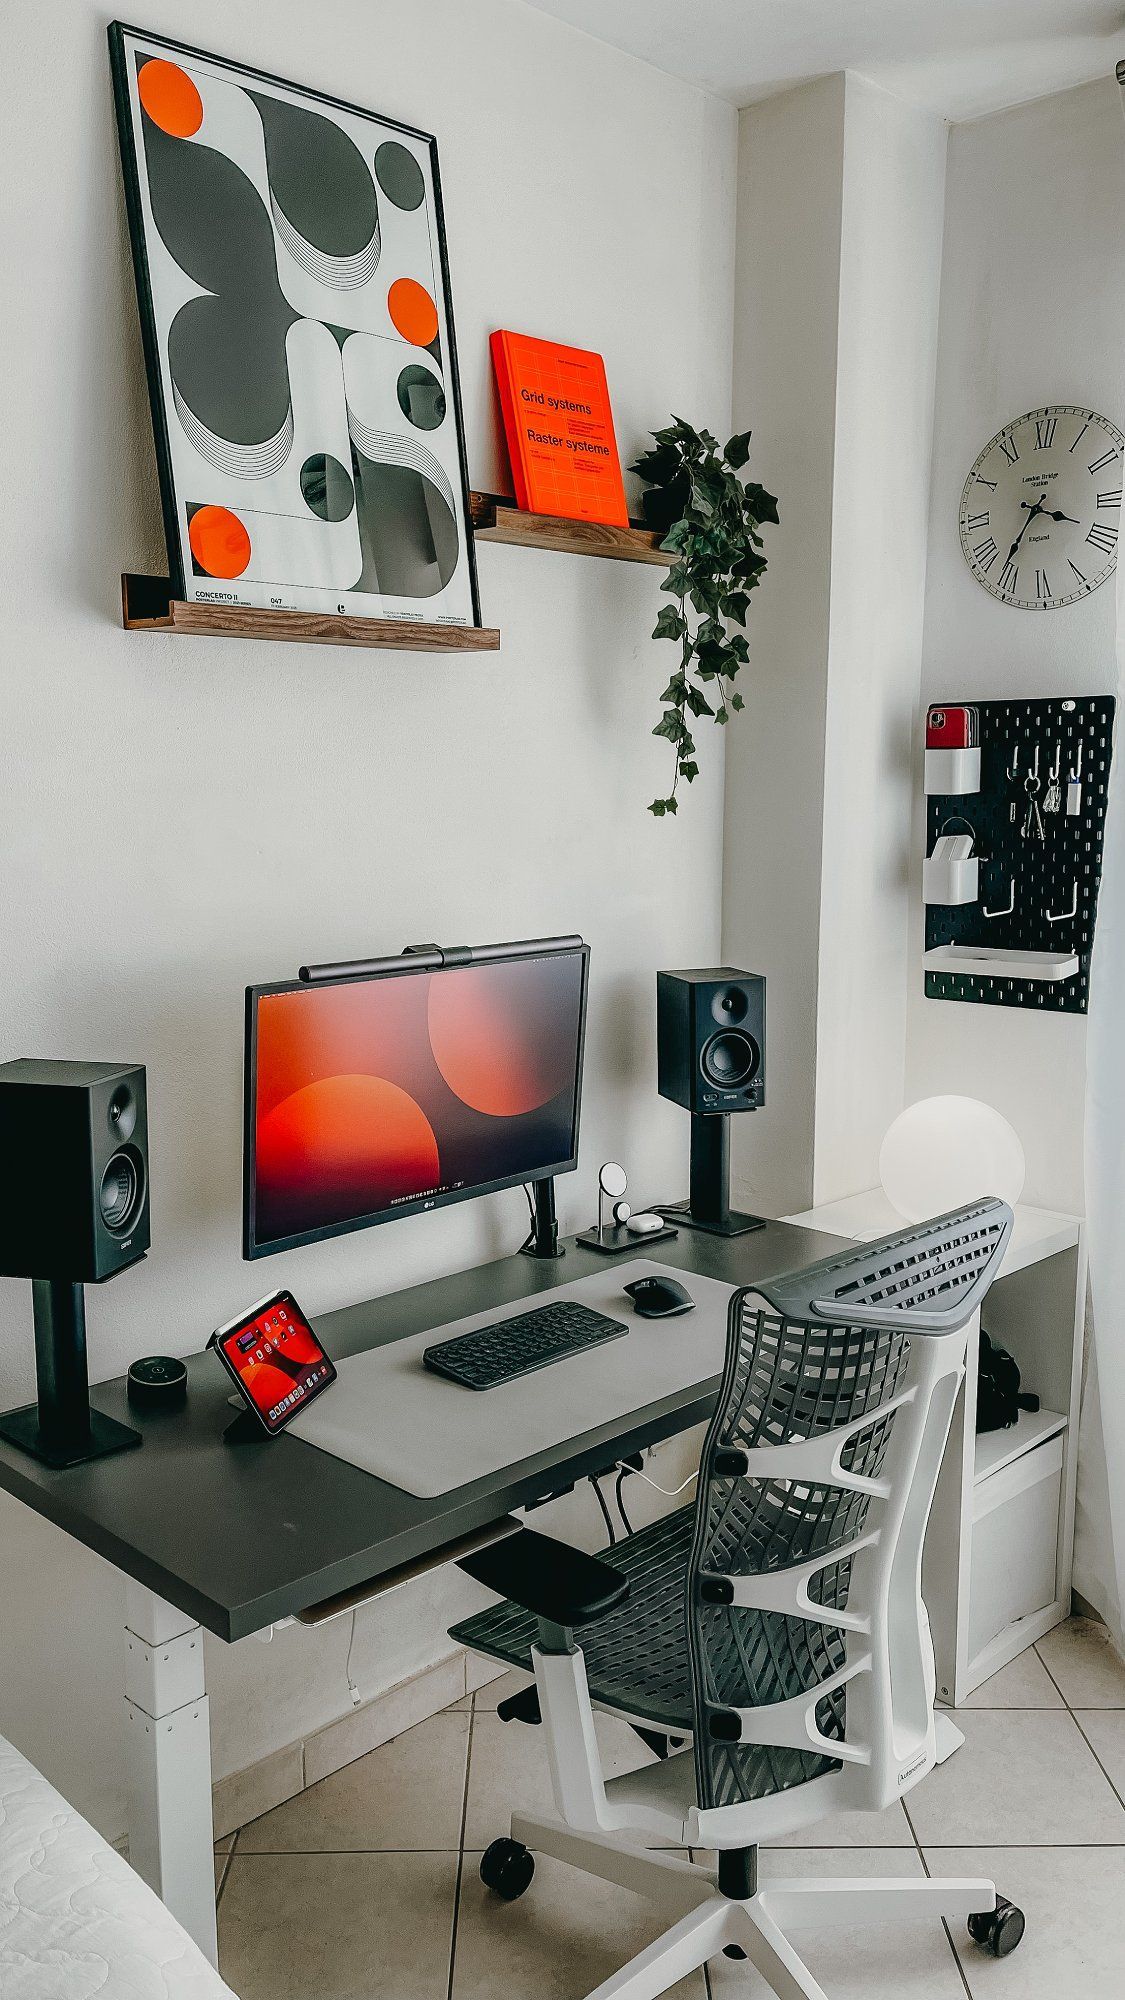 A minimalist bedroom desk setup with a grey adjustable desk, ergonomic mesh chair, dual speakers, and a black pegboard